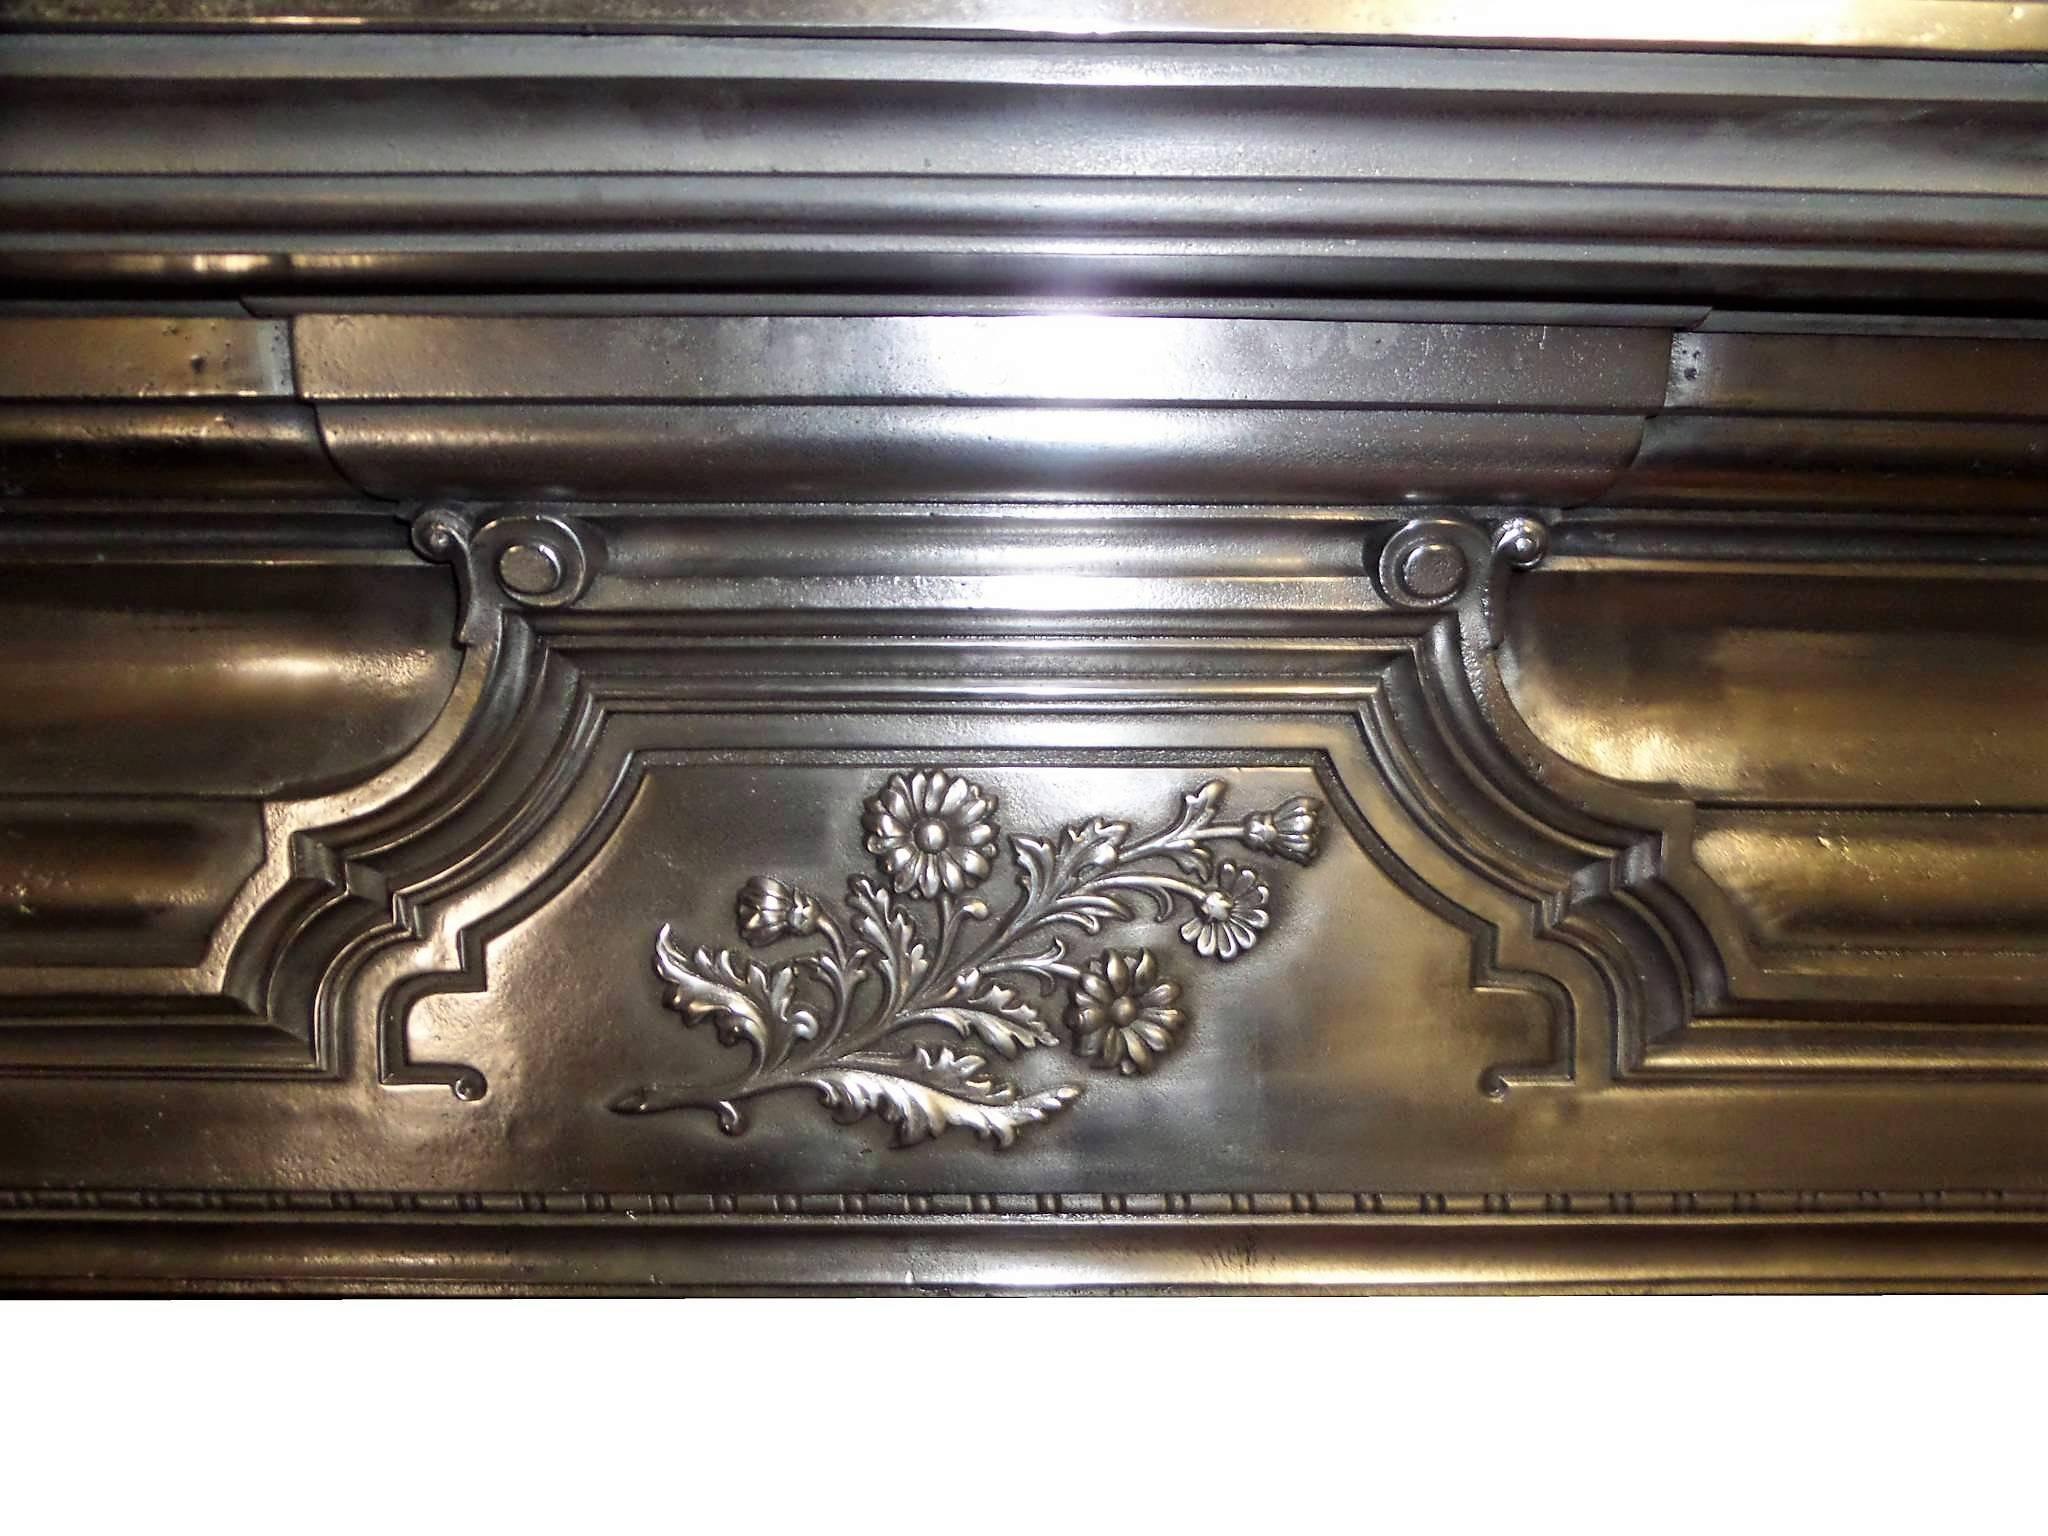 Antique restored large Edwardian burnished (semi polished) cast iron surround,
circa 1901. Beautiful cast detail with floral motif.